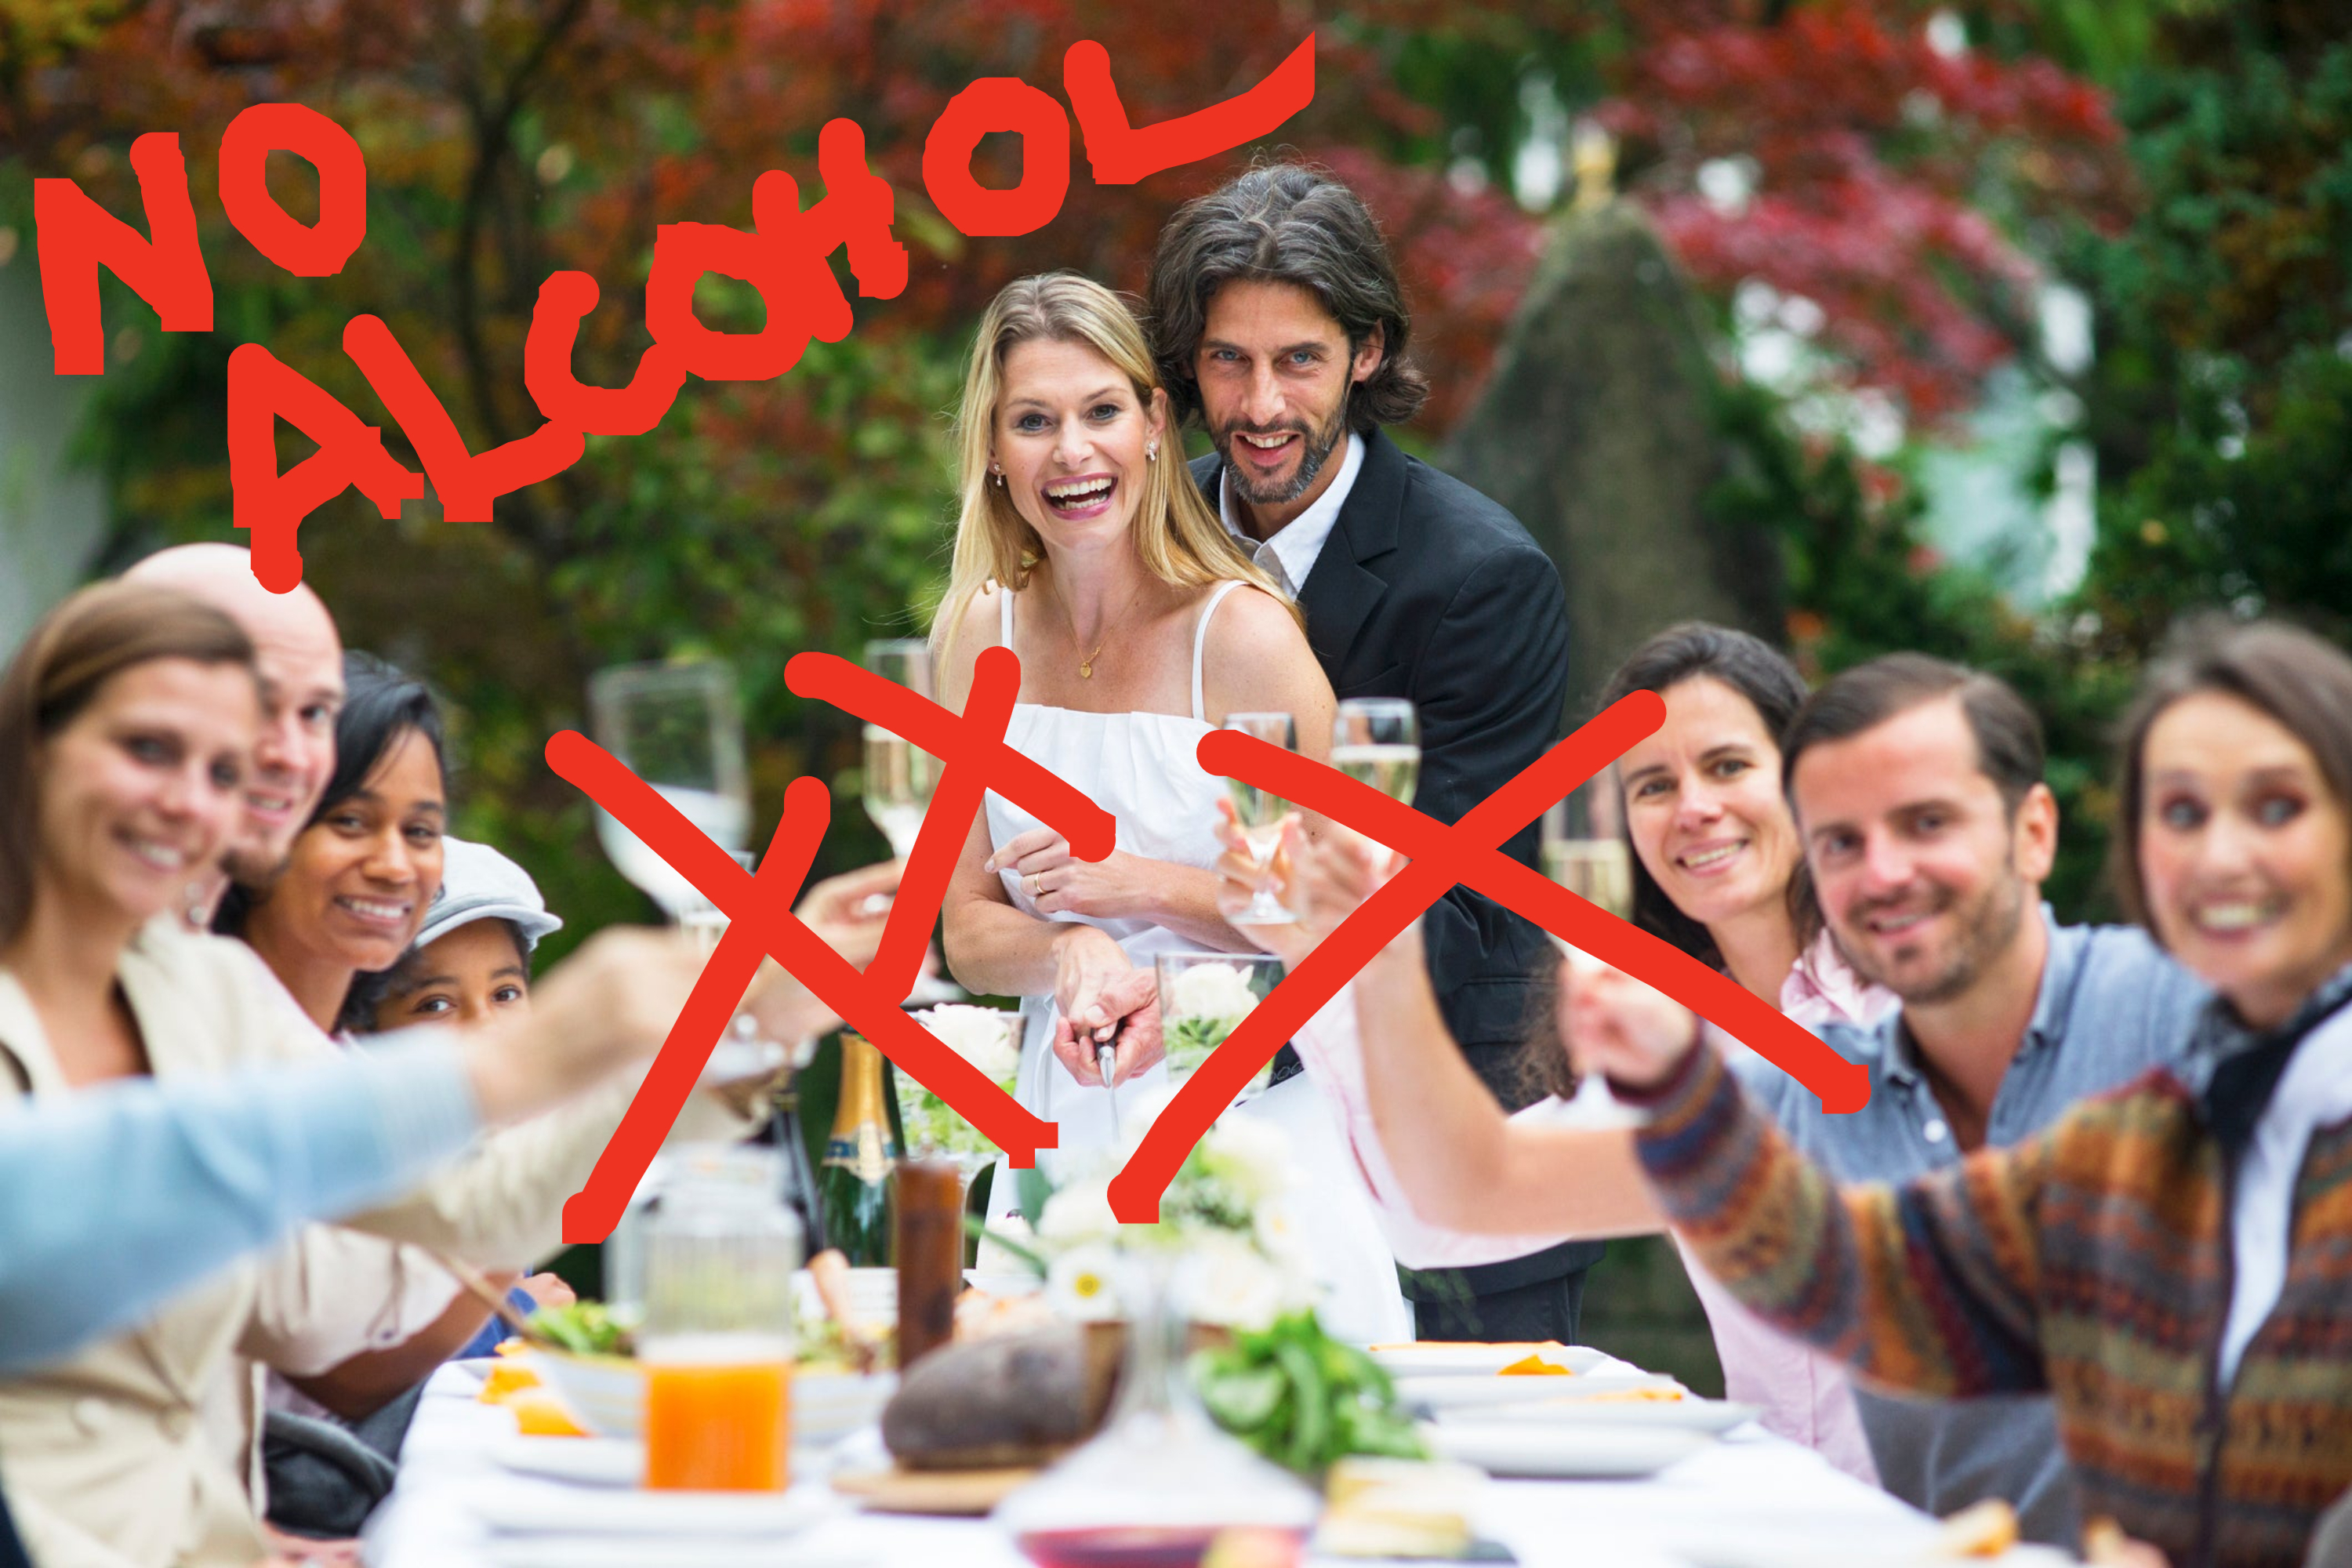 An outdoor wedding gathering with &quot;No alcohol xxx&quot; written over the photo